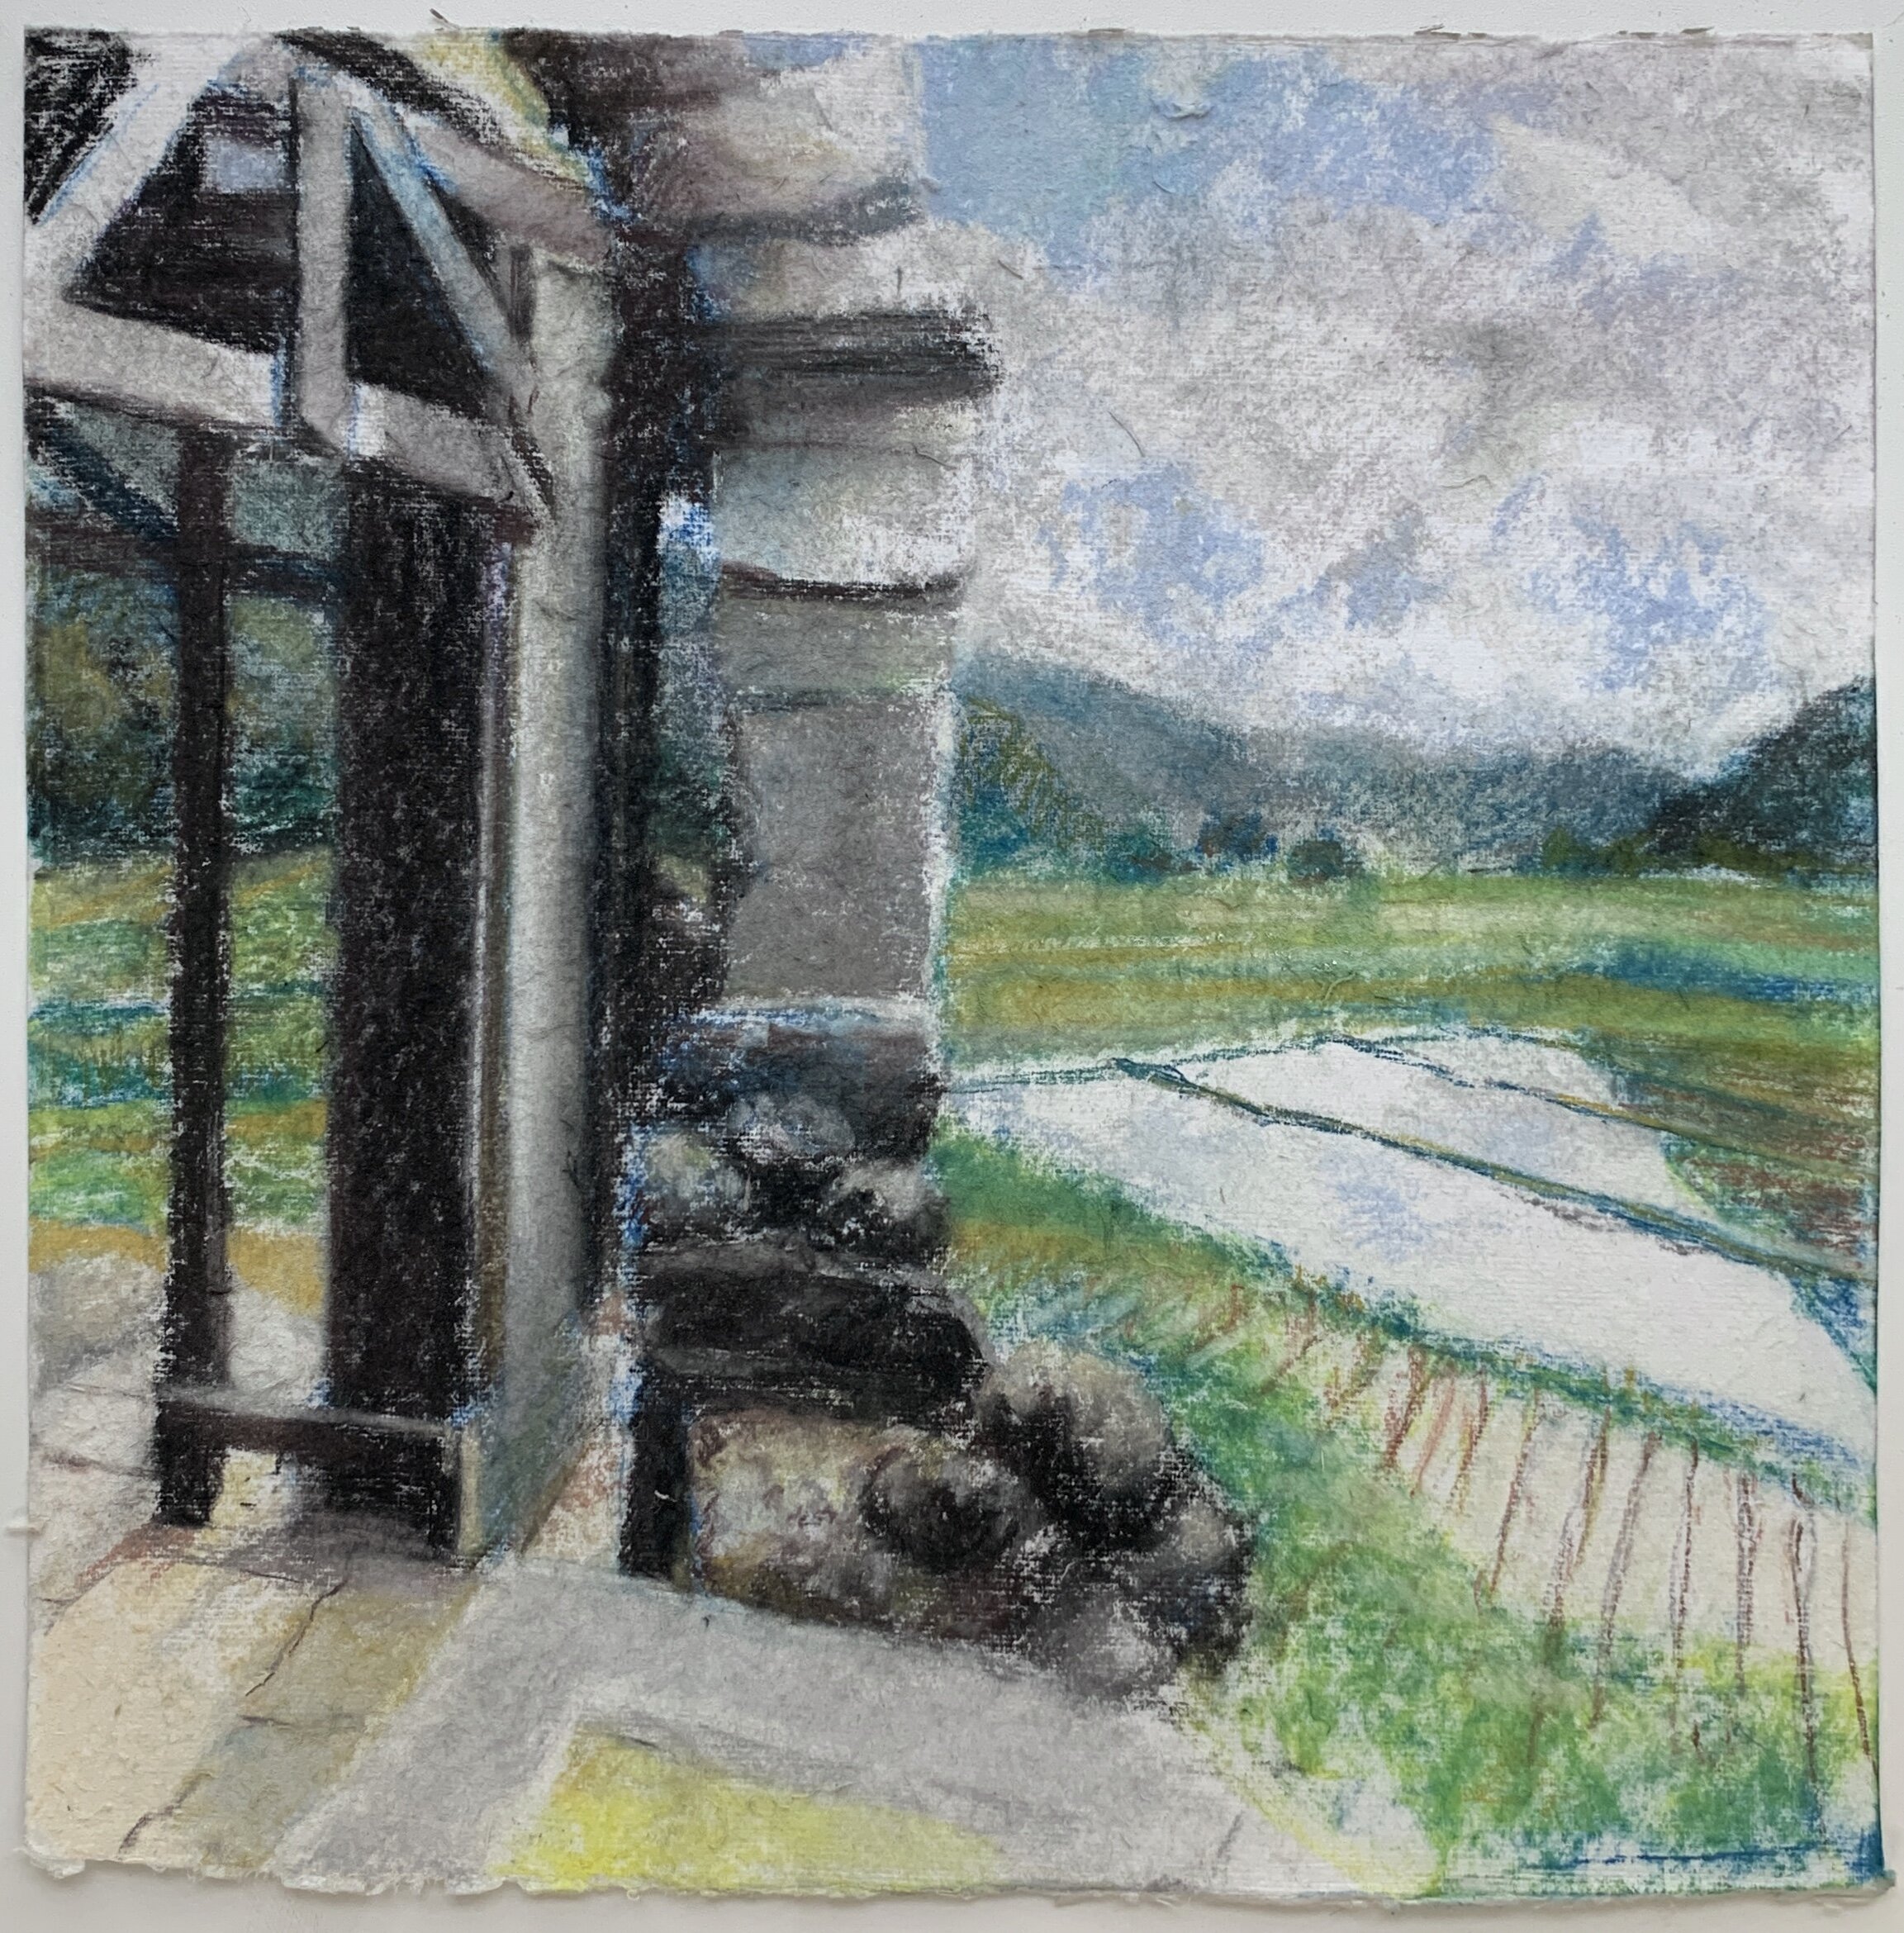   Pu Luong,  2019 pastel on paper, 12 x 12 in 